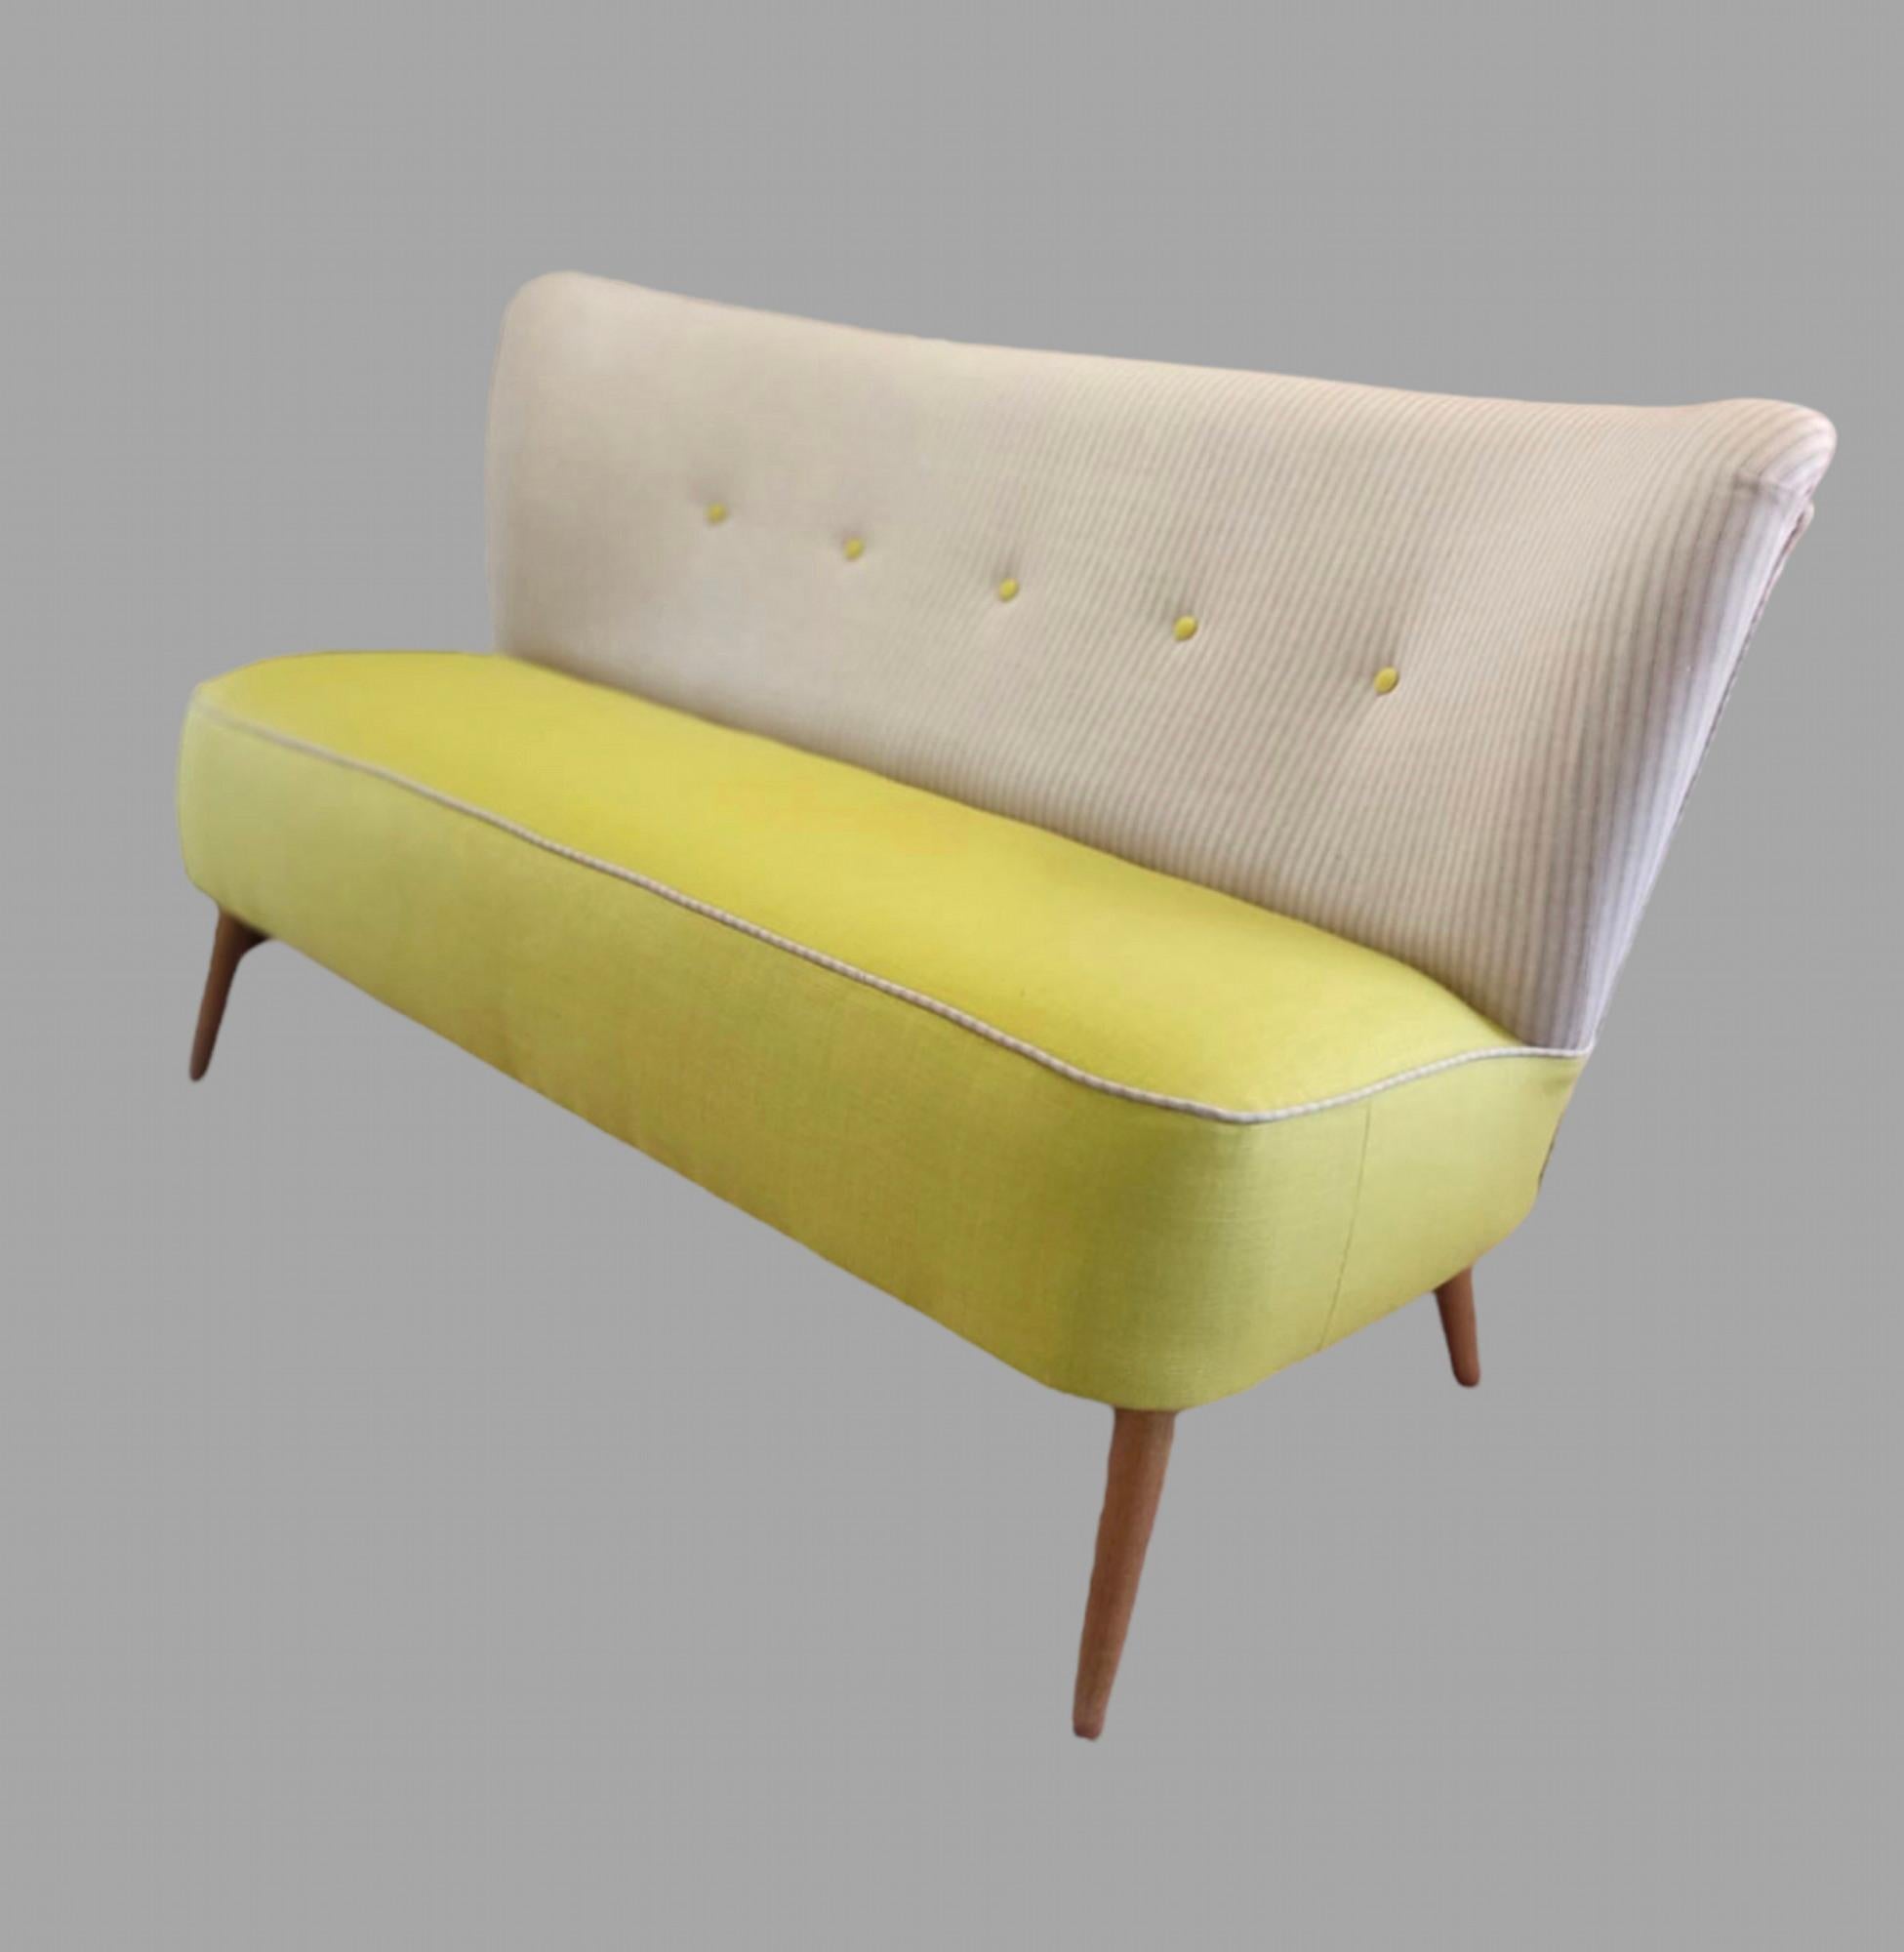 This is an attractive Danish sofa with a curved detail on stylish narrow  beech legs reupholstered in a yellow linen to the seat and pink linen tick to back and sides, double piped in the ticking with contrast yellow buttons.